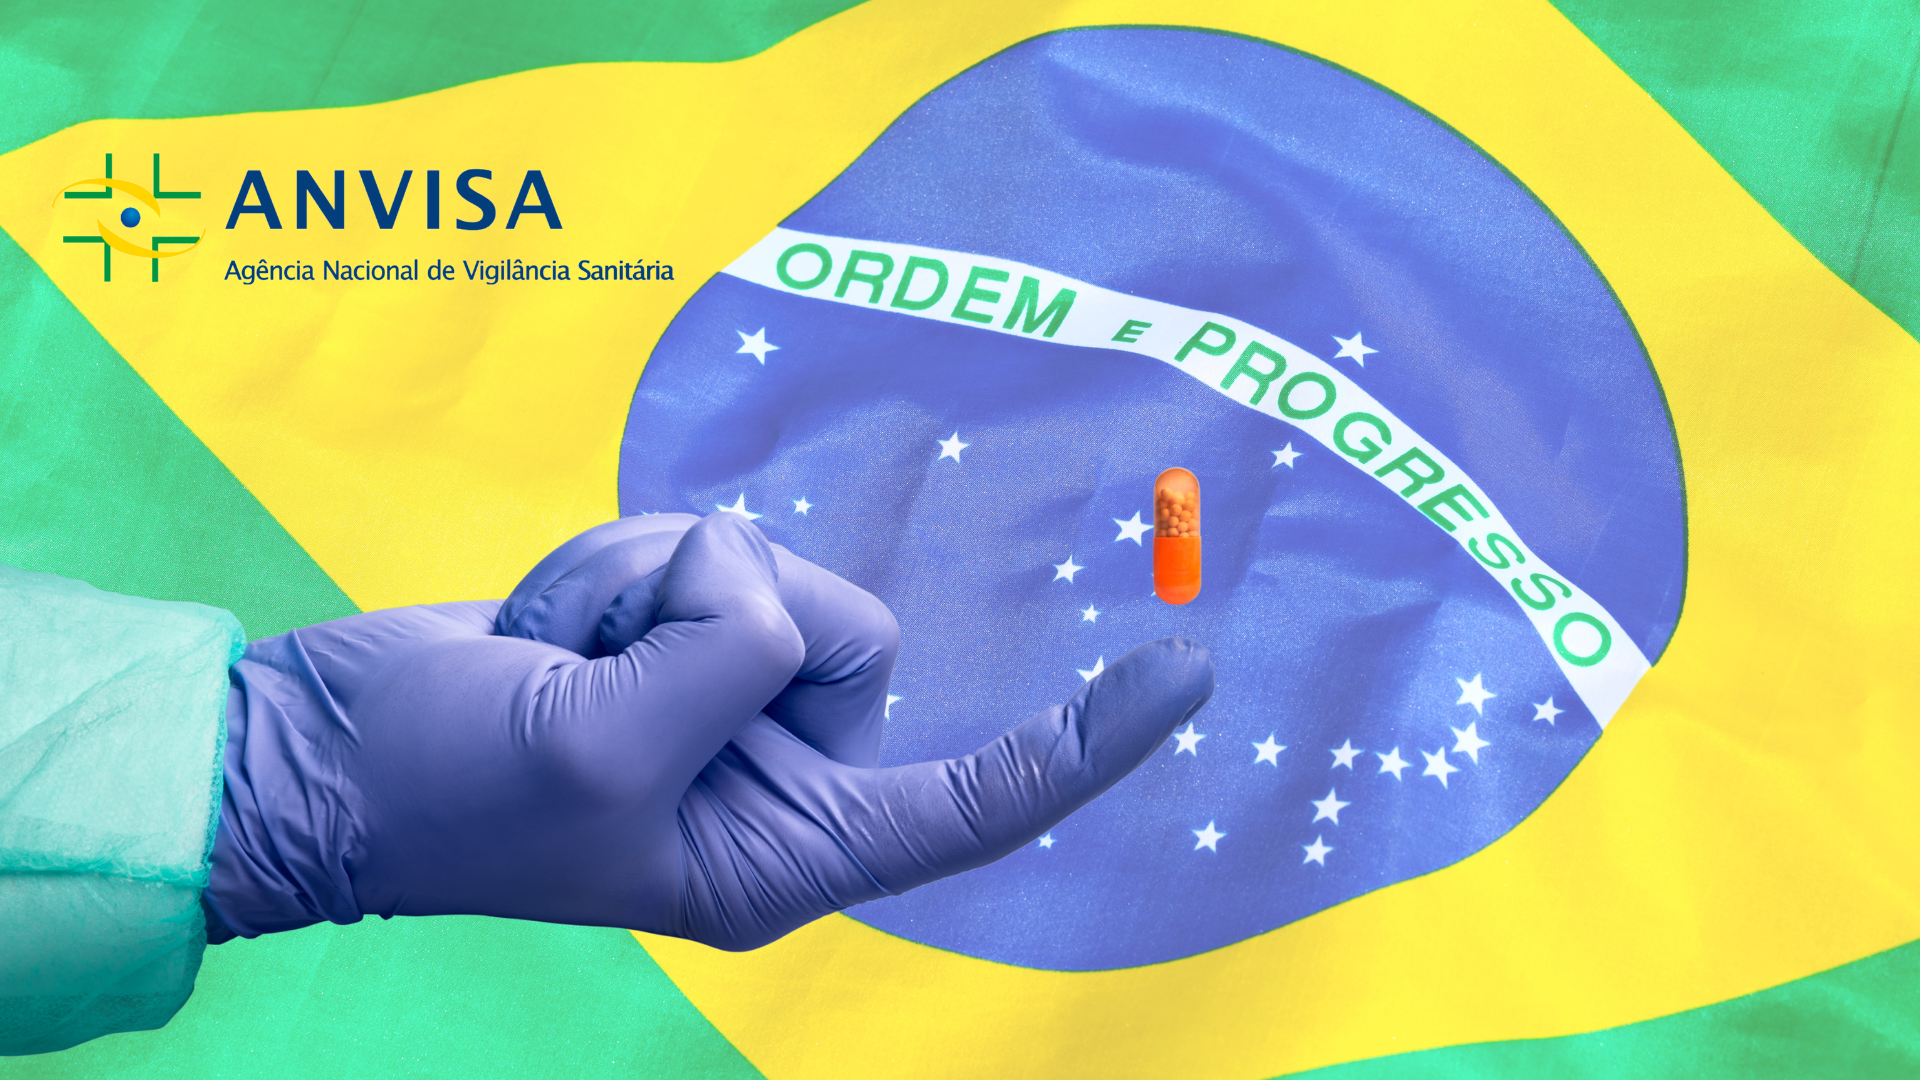 Navigating ANVISA's Requirements A Guide to Performing and Analyzing Bioequivalence Studies for the Brazilian Health Authority blog image.